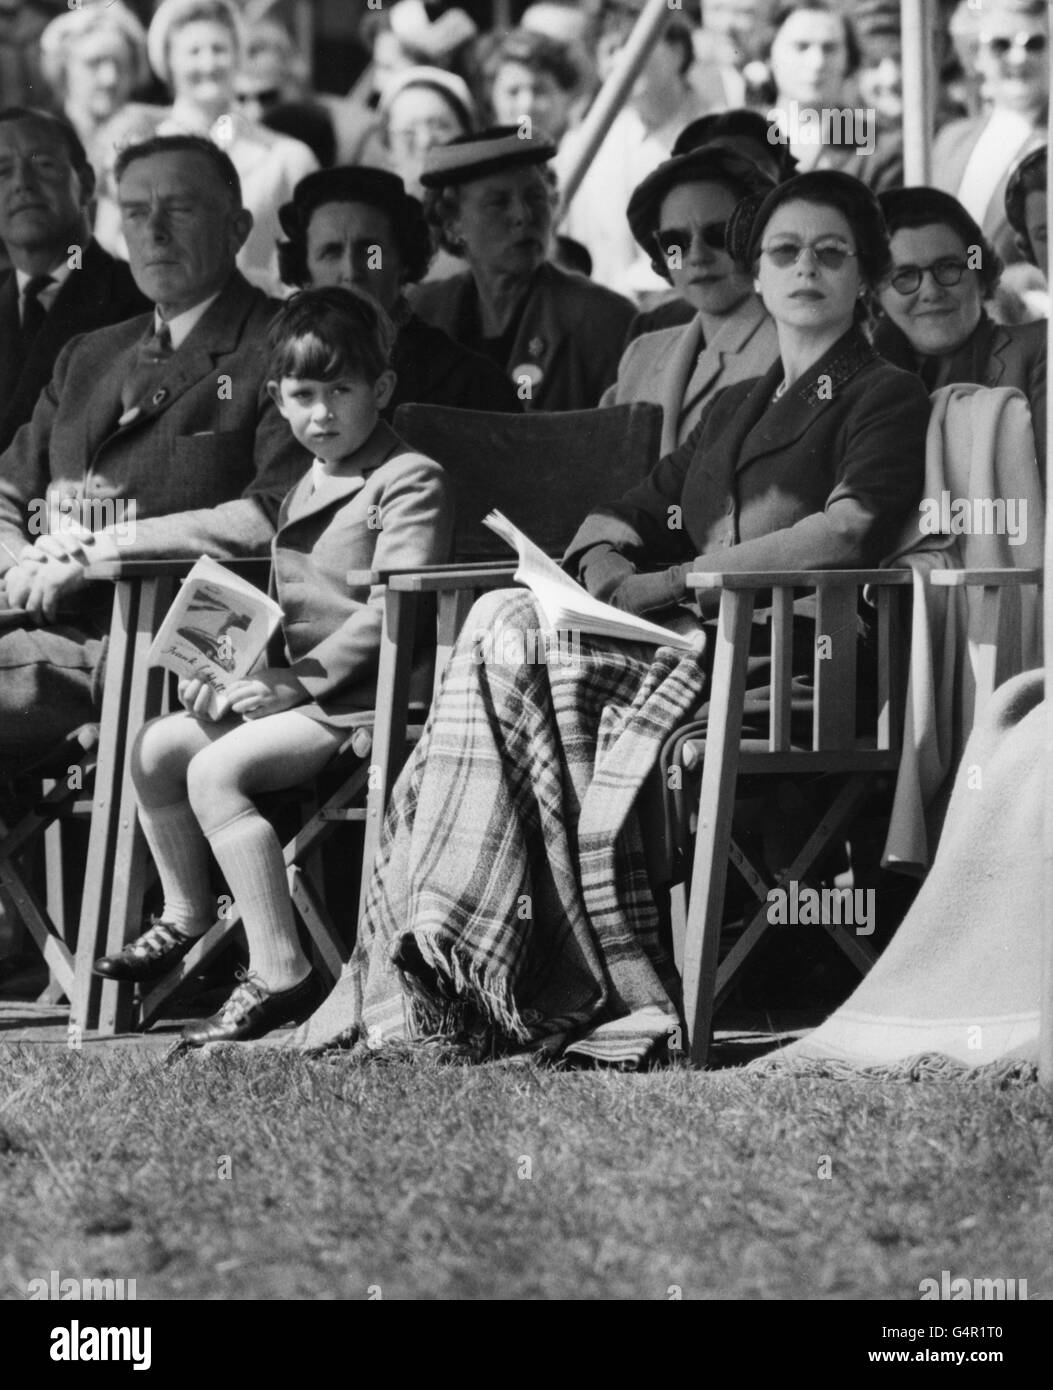 Equestrian - Windsor Horse Show - Home Park, Windsor. Queen Elizabeth II and Prince Charles watching events in the Royal Windsor Horse Show at Home Park, Windsor. Stock Photo